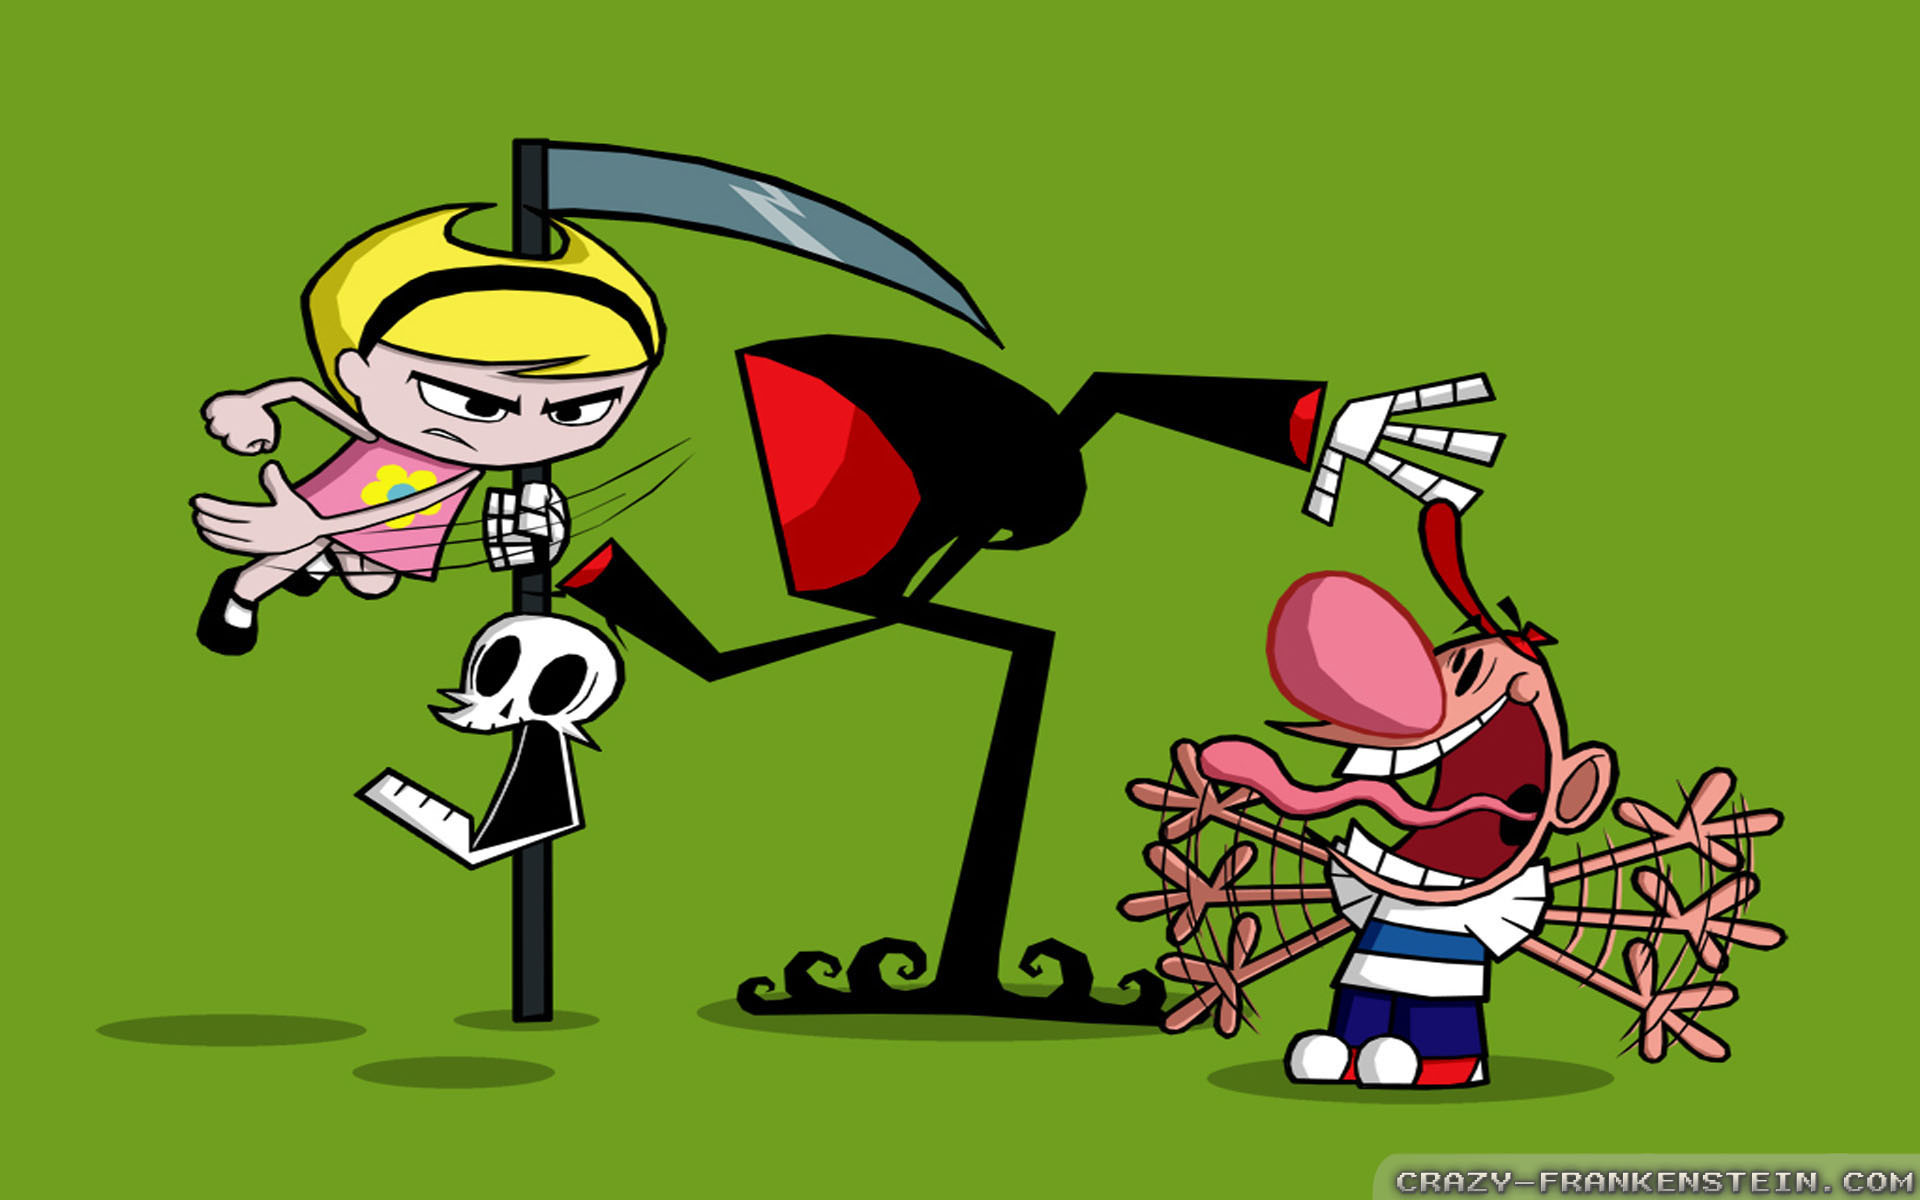 1920x1200 Wallpaper: Grim adventures of Billy and Mandy cartoon wallpapers.  Resolution: 1024x768 | 1280x1024 | 1600x1200. Widescreen Res: 1440x900 |  1680x1050 | ...